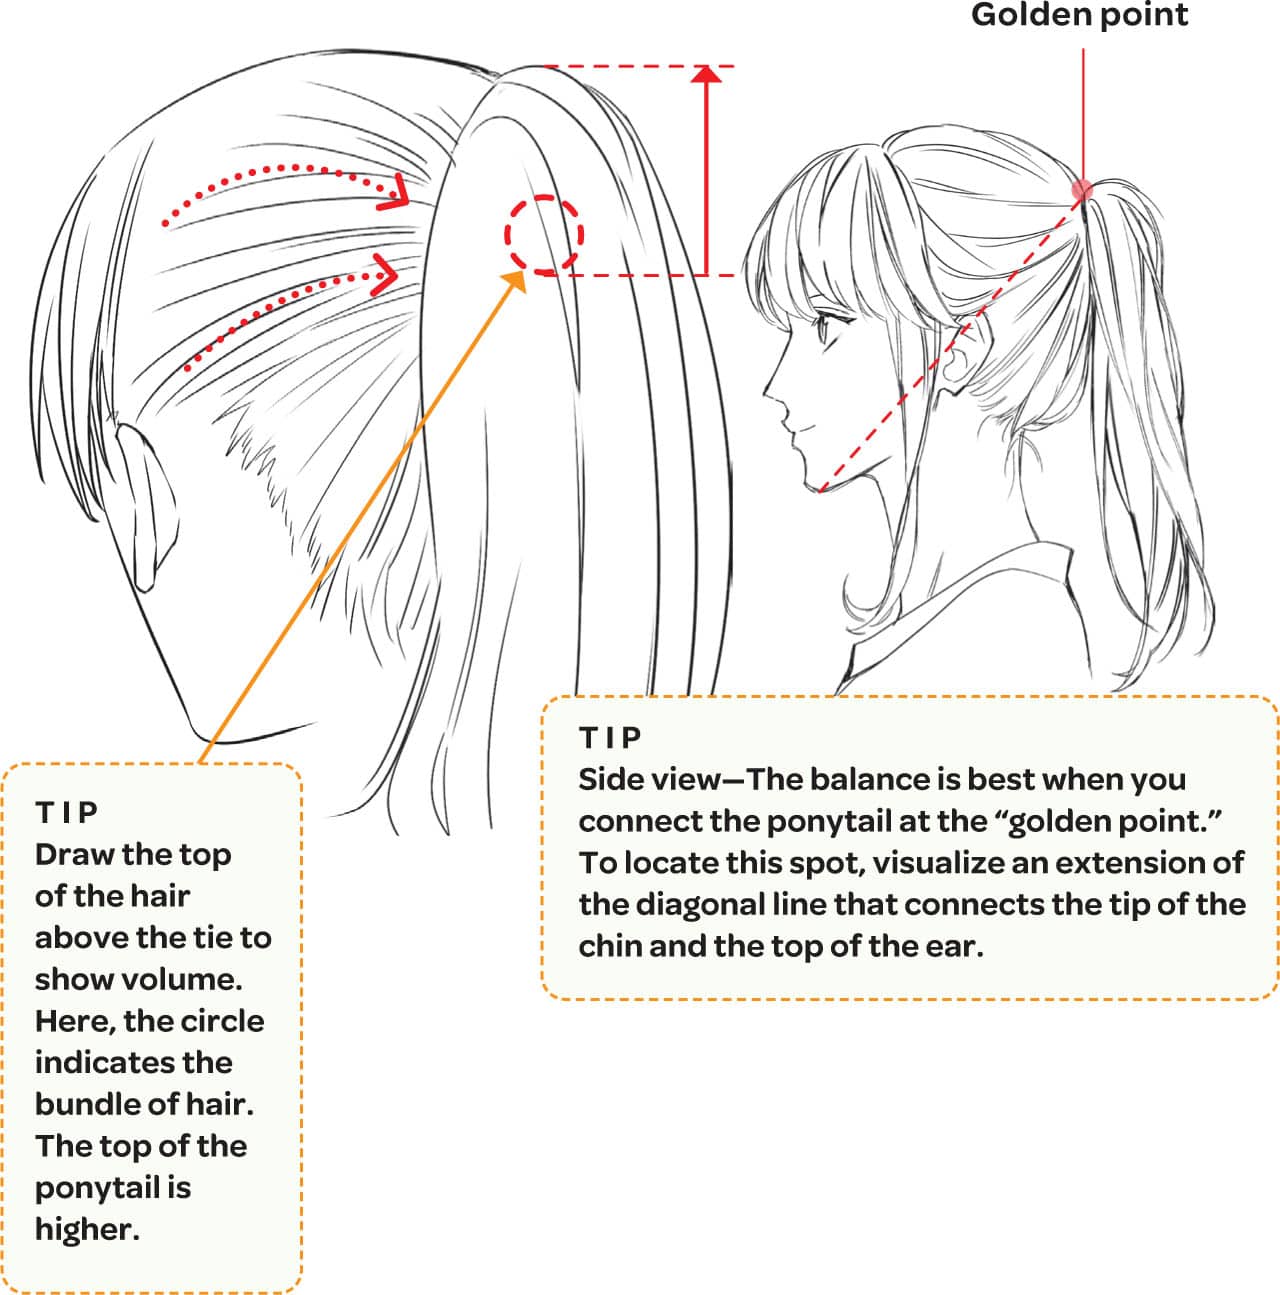 Golden point TIP Side view—The balance is best when you connect the ponytail at the “golden point.” To locate this spot, visualize an extension of the diagonal line that connects the tip of the chin and the top of the ear. TIP Draw the top of the hair above the tie to show volume. Here, the circle indicates the bundle of hair. The top of the ponytail is higher.